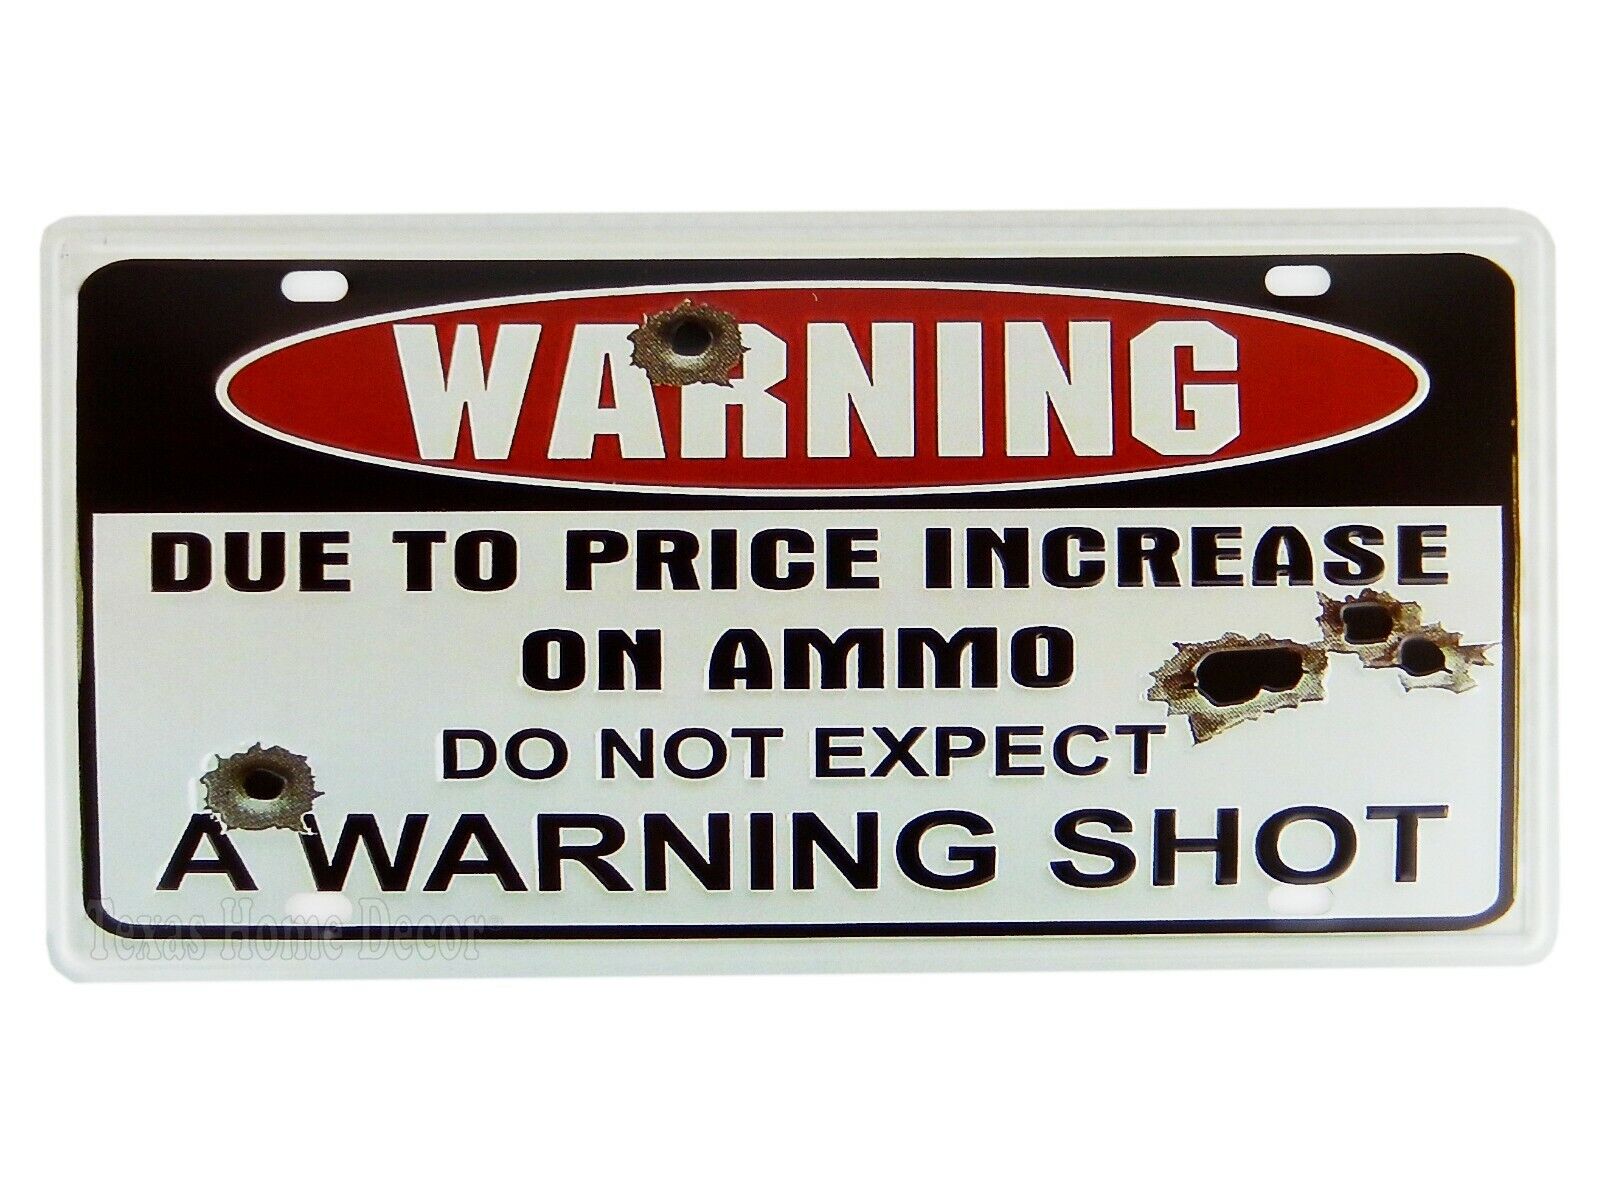 Due to Price Increase on Ammo Do Not Expect a Warning Shot Metal License Plate